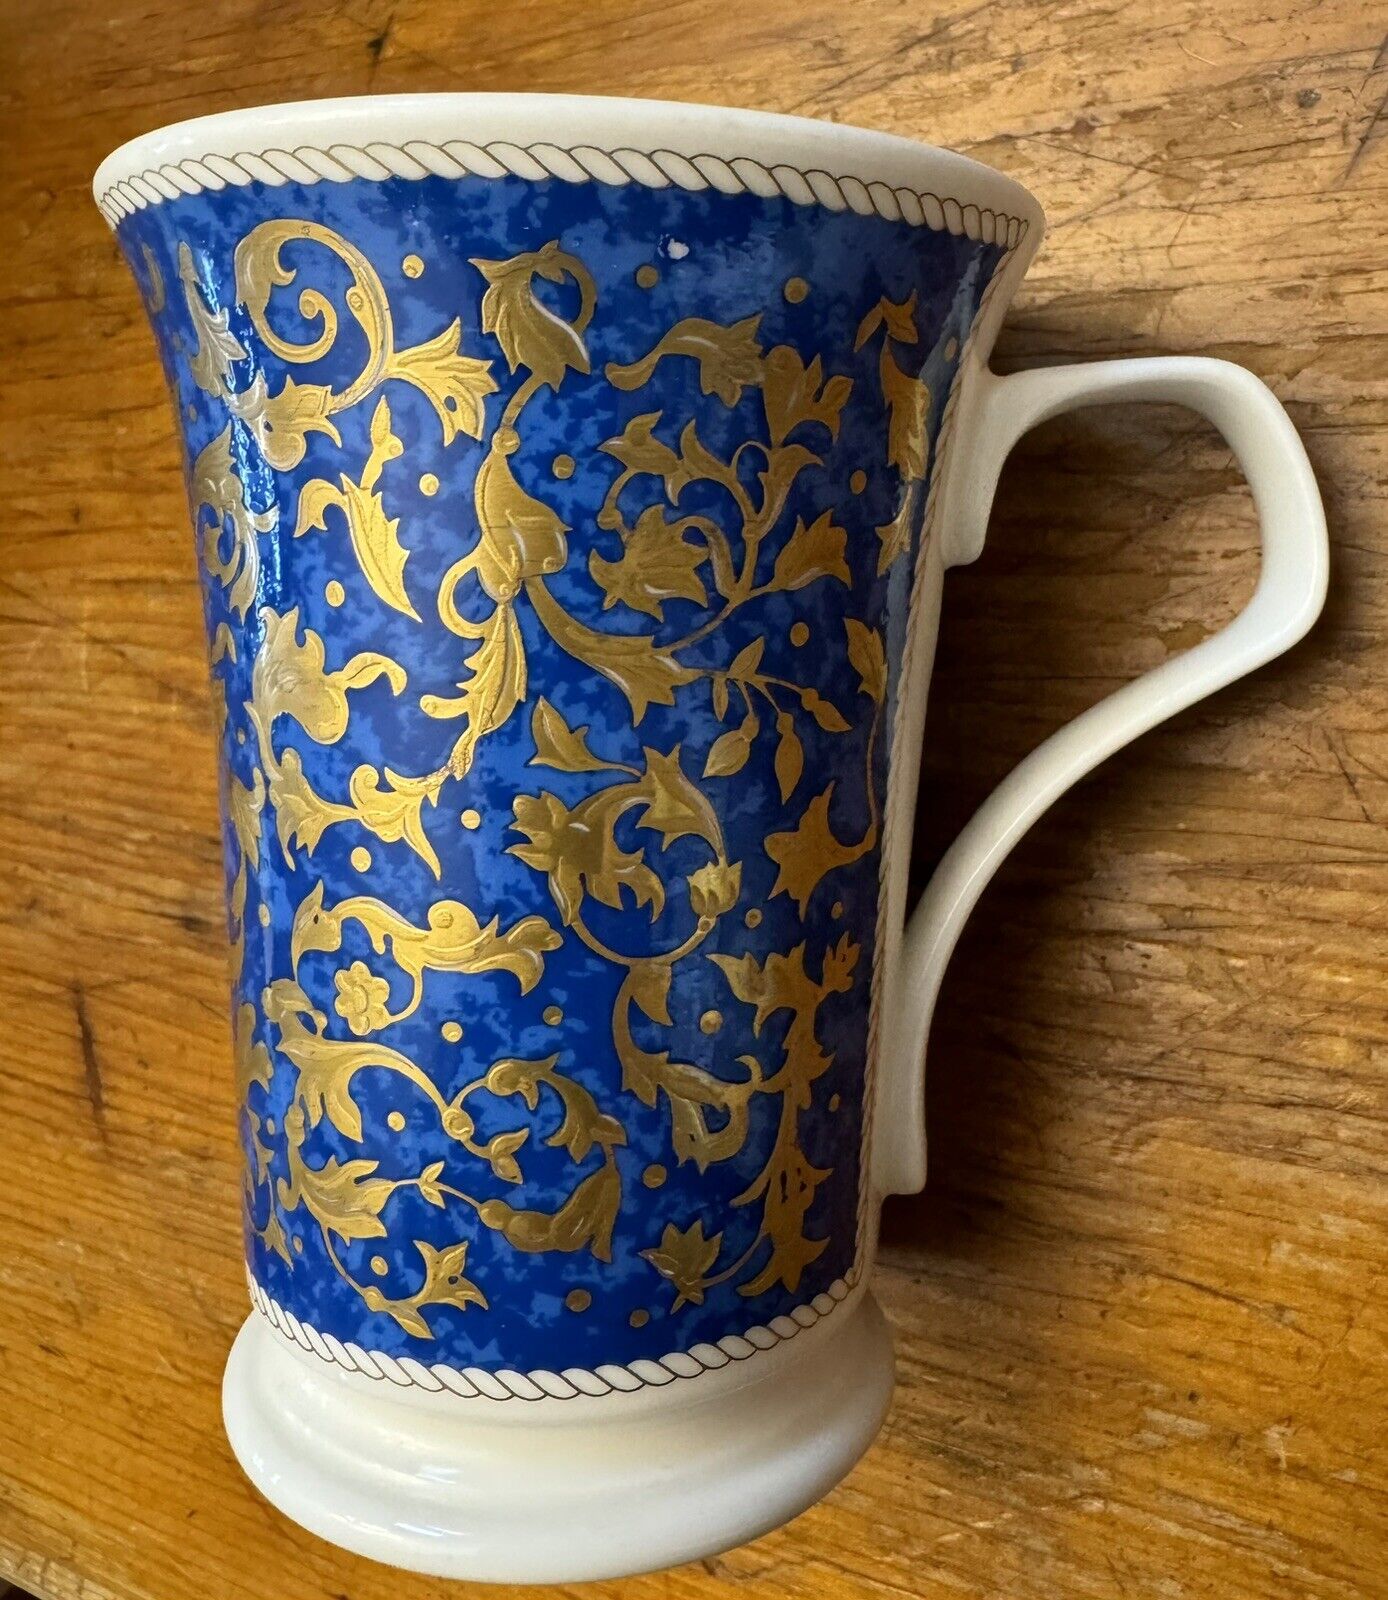 Dunoon Mantua Mug Cup by Cherry Denman Made In England Winding Vines Blue